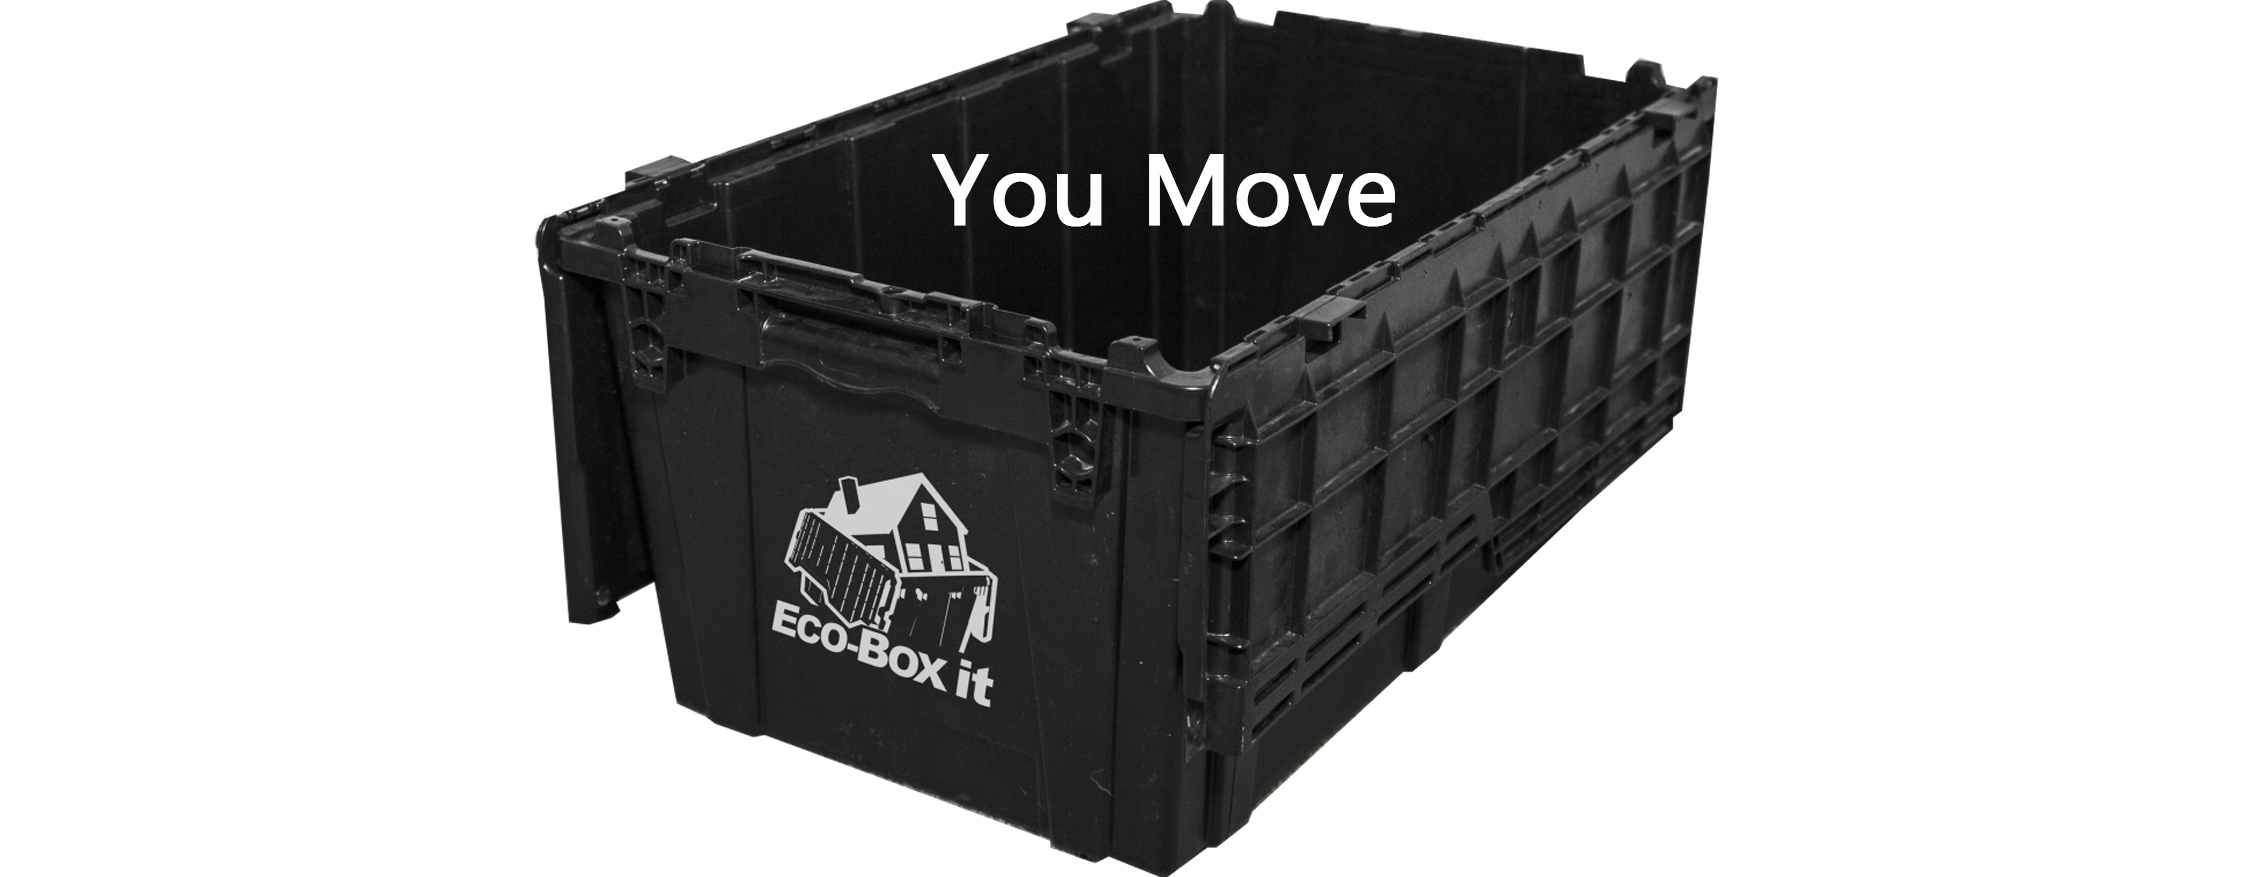 https://www.ecoboxit.com/wp-content/uploads/2017/02/truck-move.png